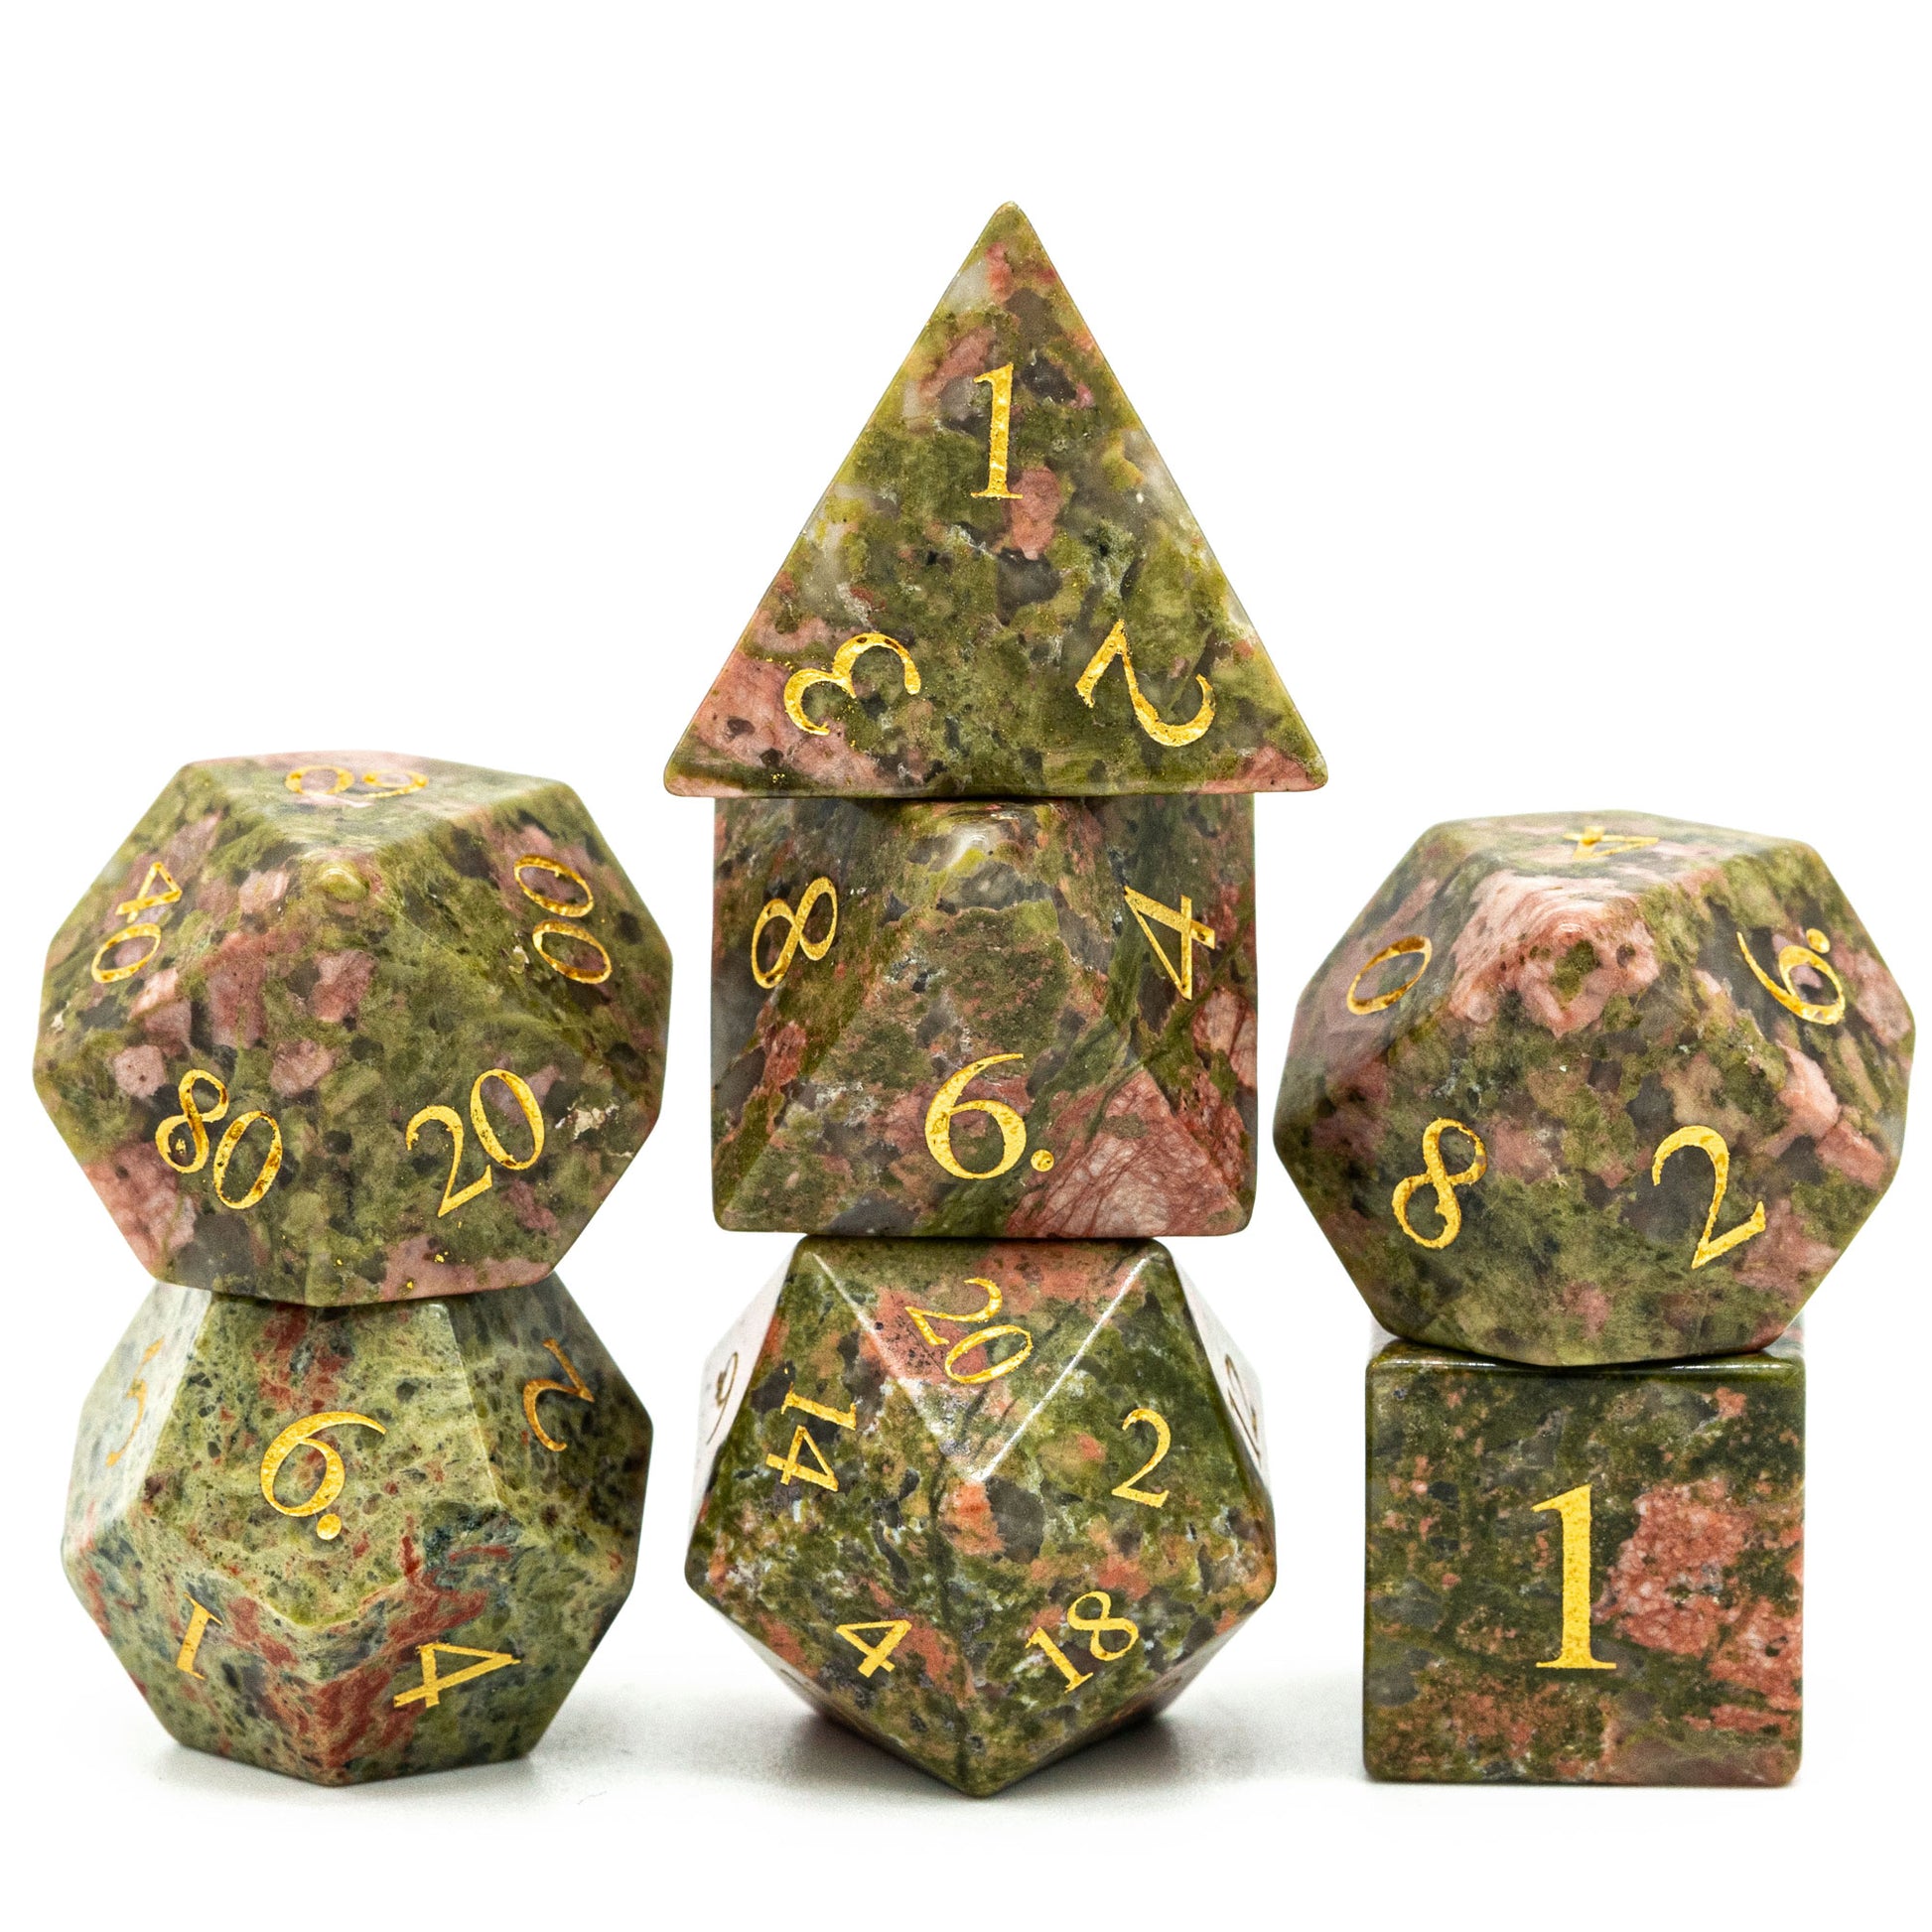 7 piece stone dice set, unakite paste, pink and green with gold numbers